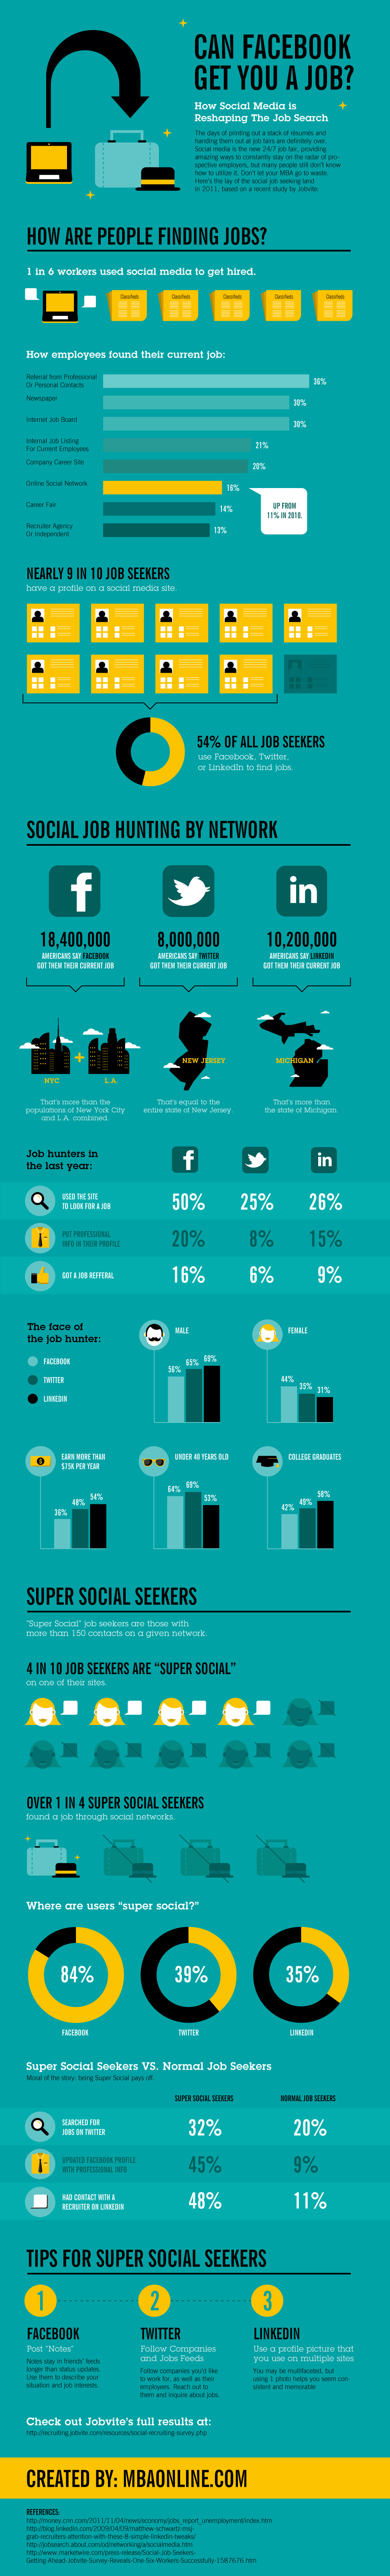 Infographic: Getting A Job on Facebook.